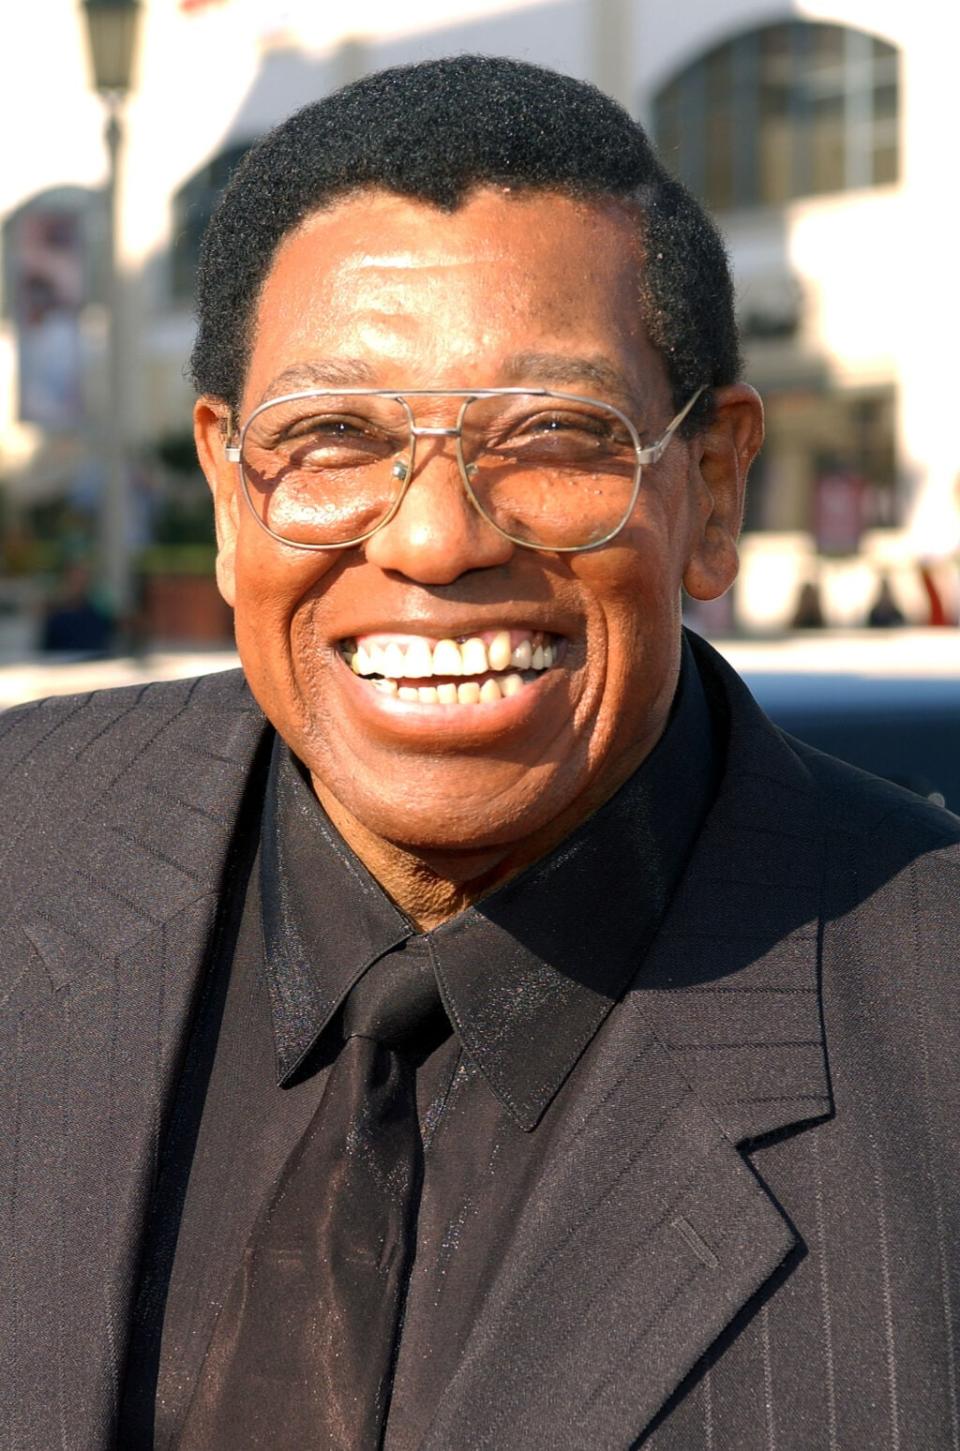 PASADENA, CA – SEPTEMBER 28: Actor Johnny Brown arrives to the “First-Ever” BET Comedy Awards at the Pasadena Civic Auditorium September 28, 2004 in Pasadena, California. (Photo by Amanda Edwards/Getty Images)